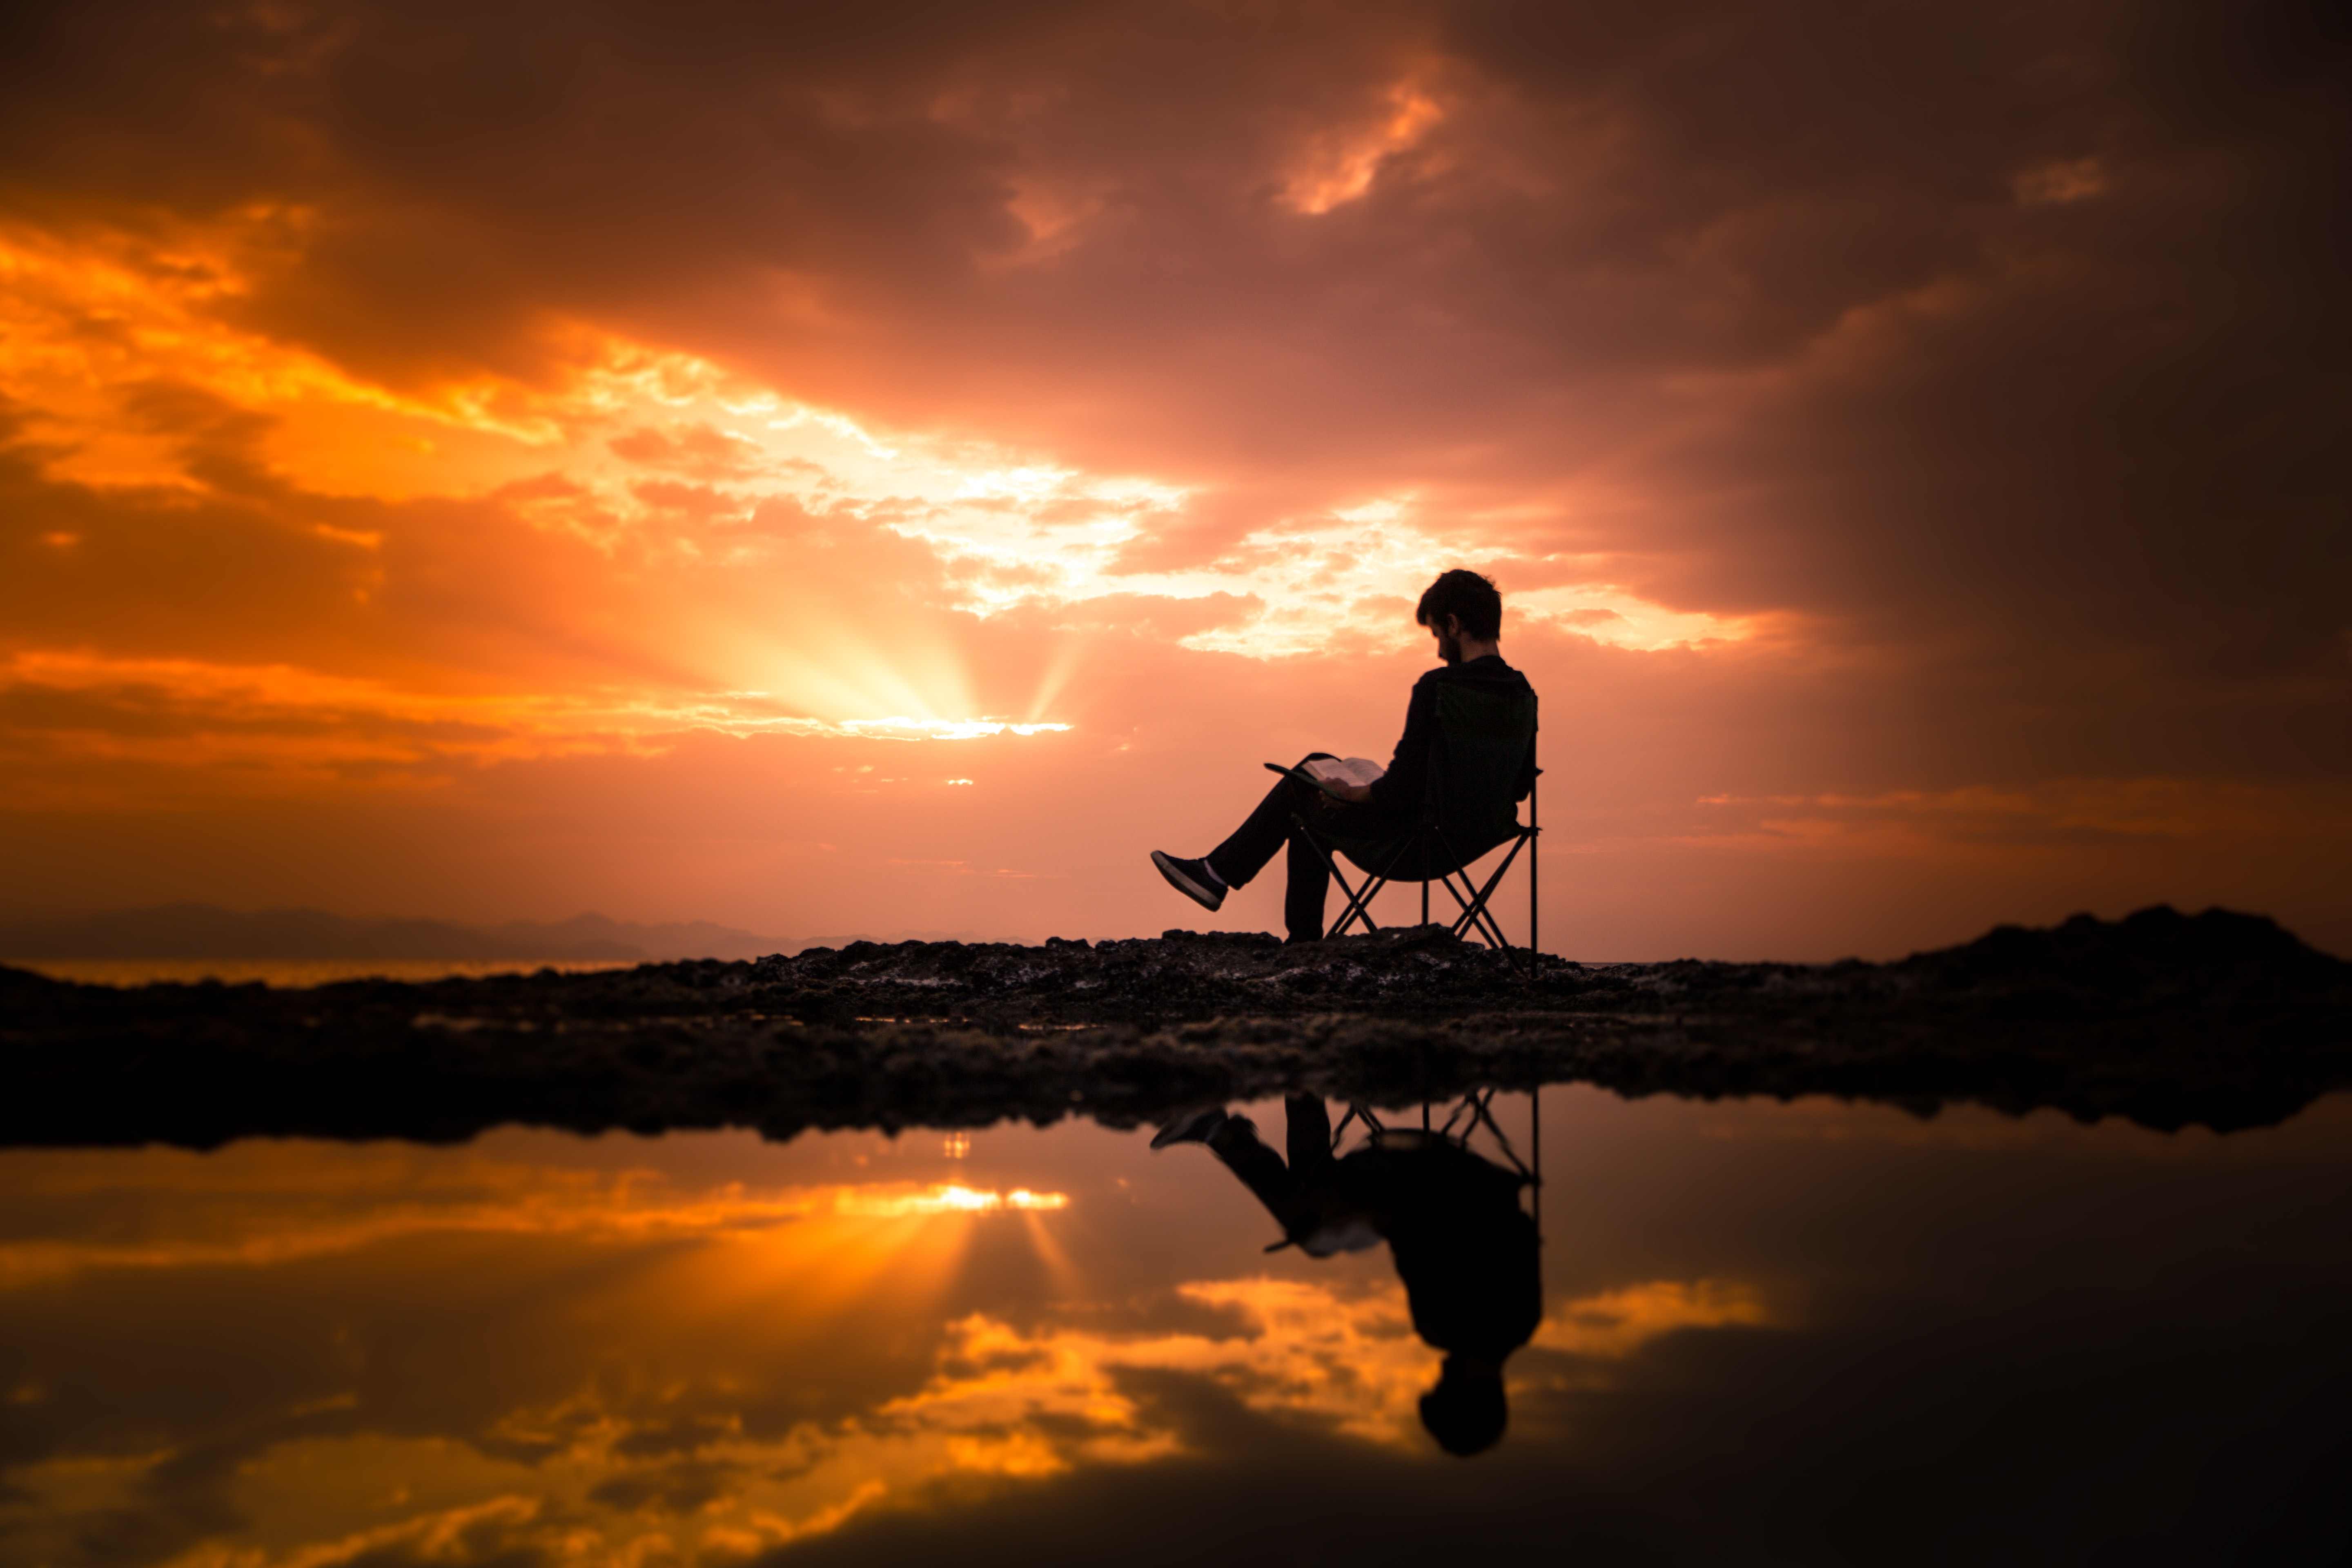 Image of a man sitting, reading a book outside during a sunset